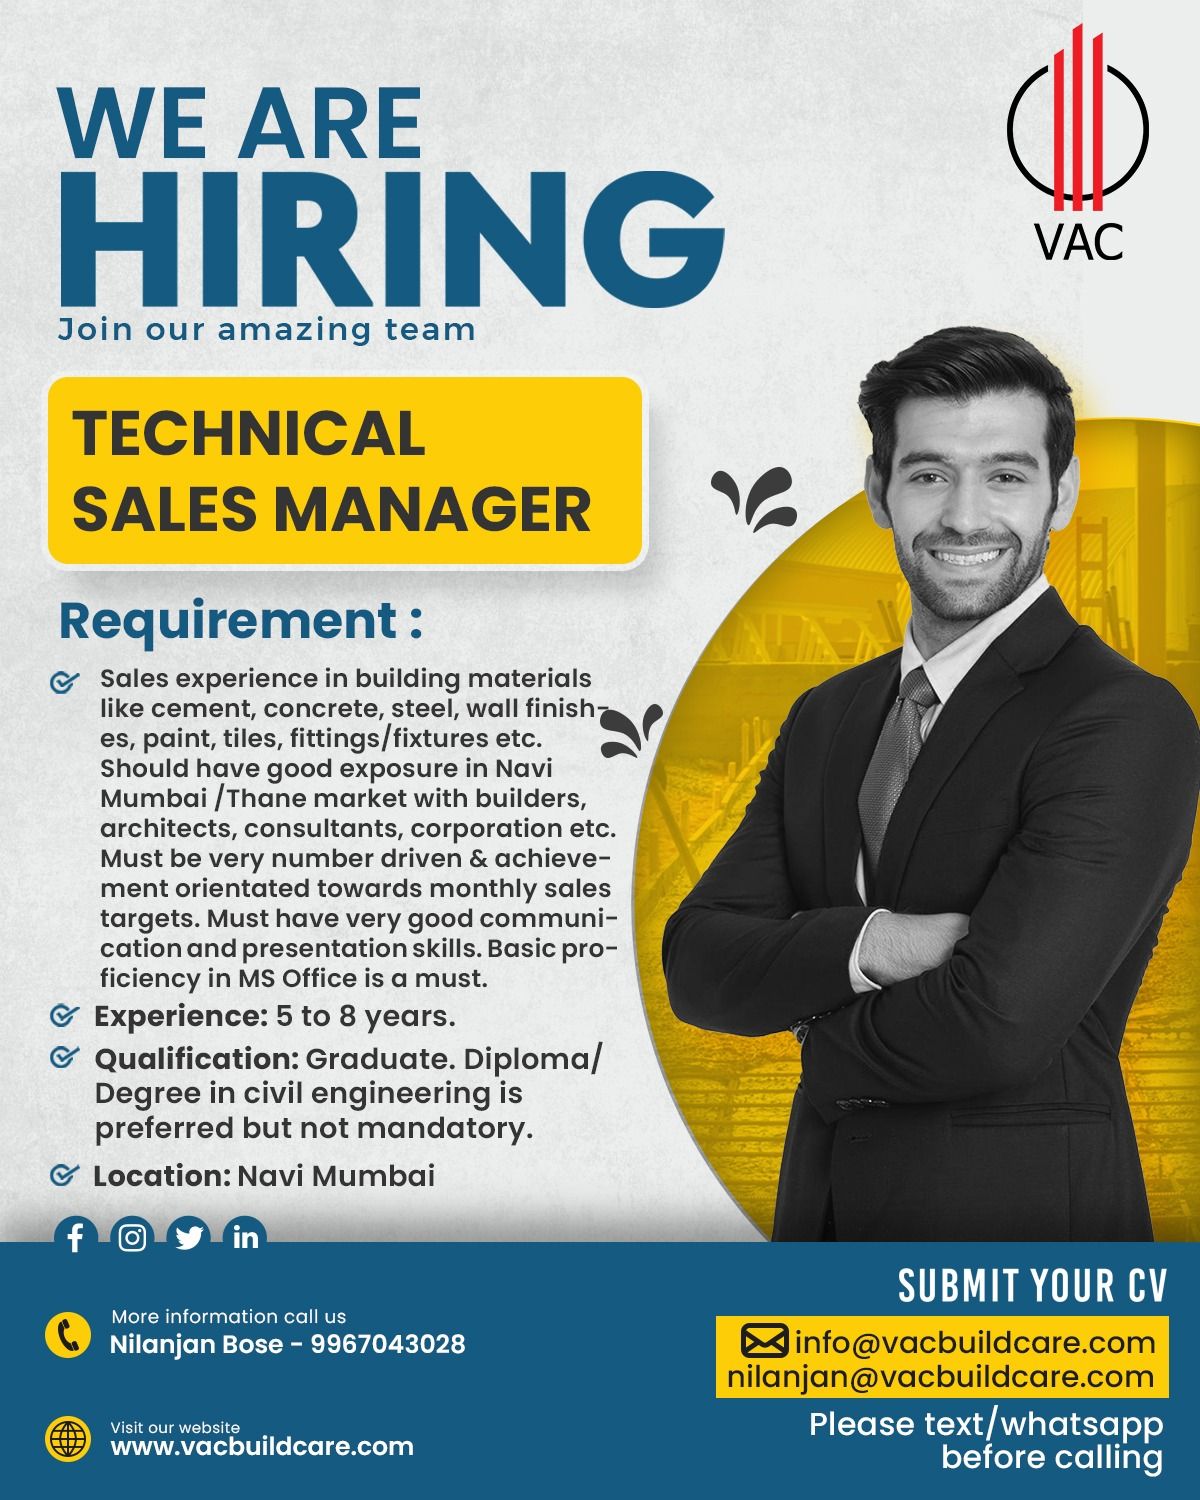 We are Hiring Technical Sales Manager in Mumbai - VAC